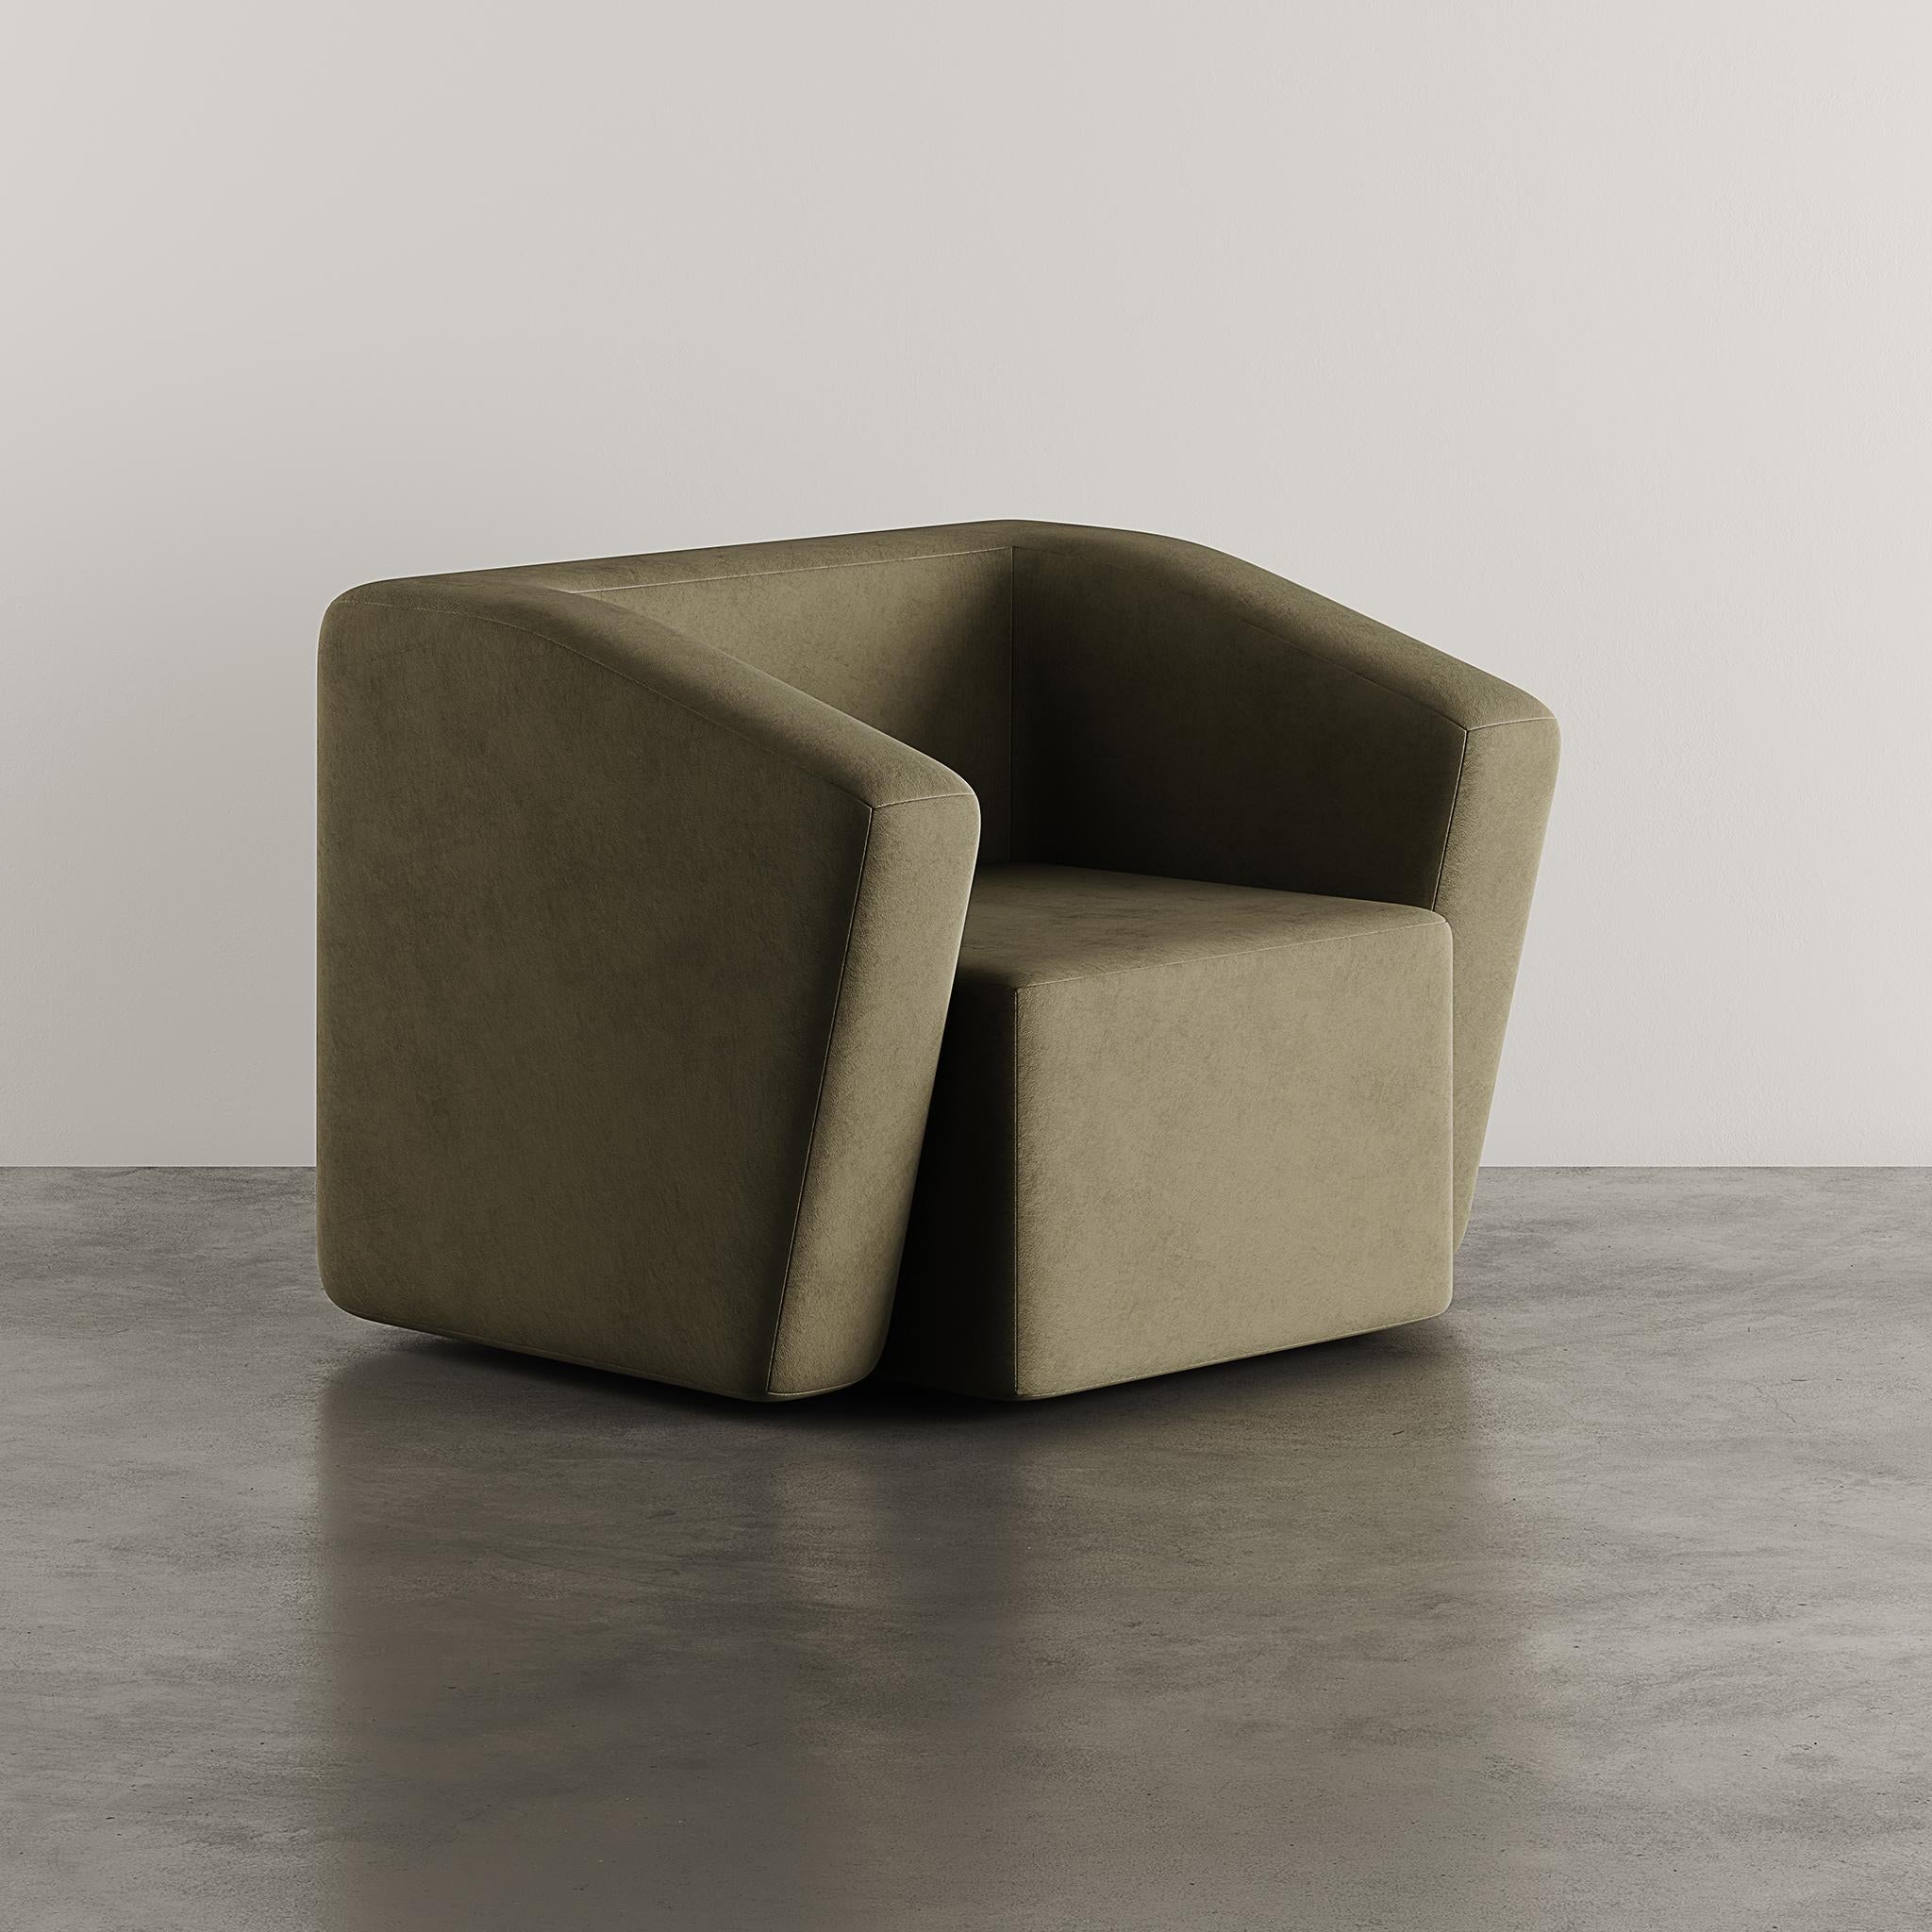 Introducing the Kobe Armchair in a luxurious green suede finish – a perfect blend of sophistication and comfort.
This elegant armchair boasts a sleek design that seamlessly merges modern aesthetics with timeless style.
The lush green suede